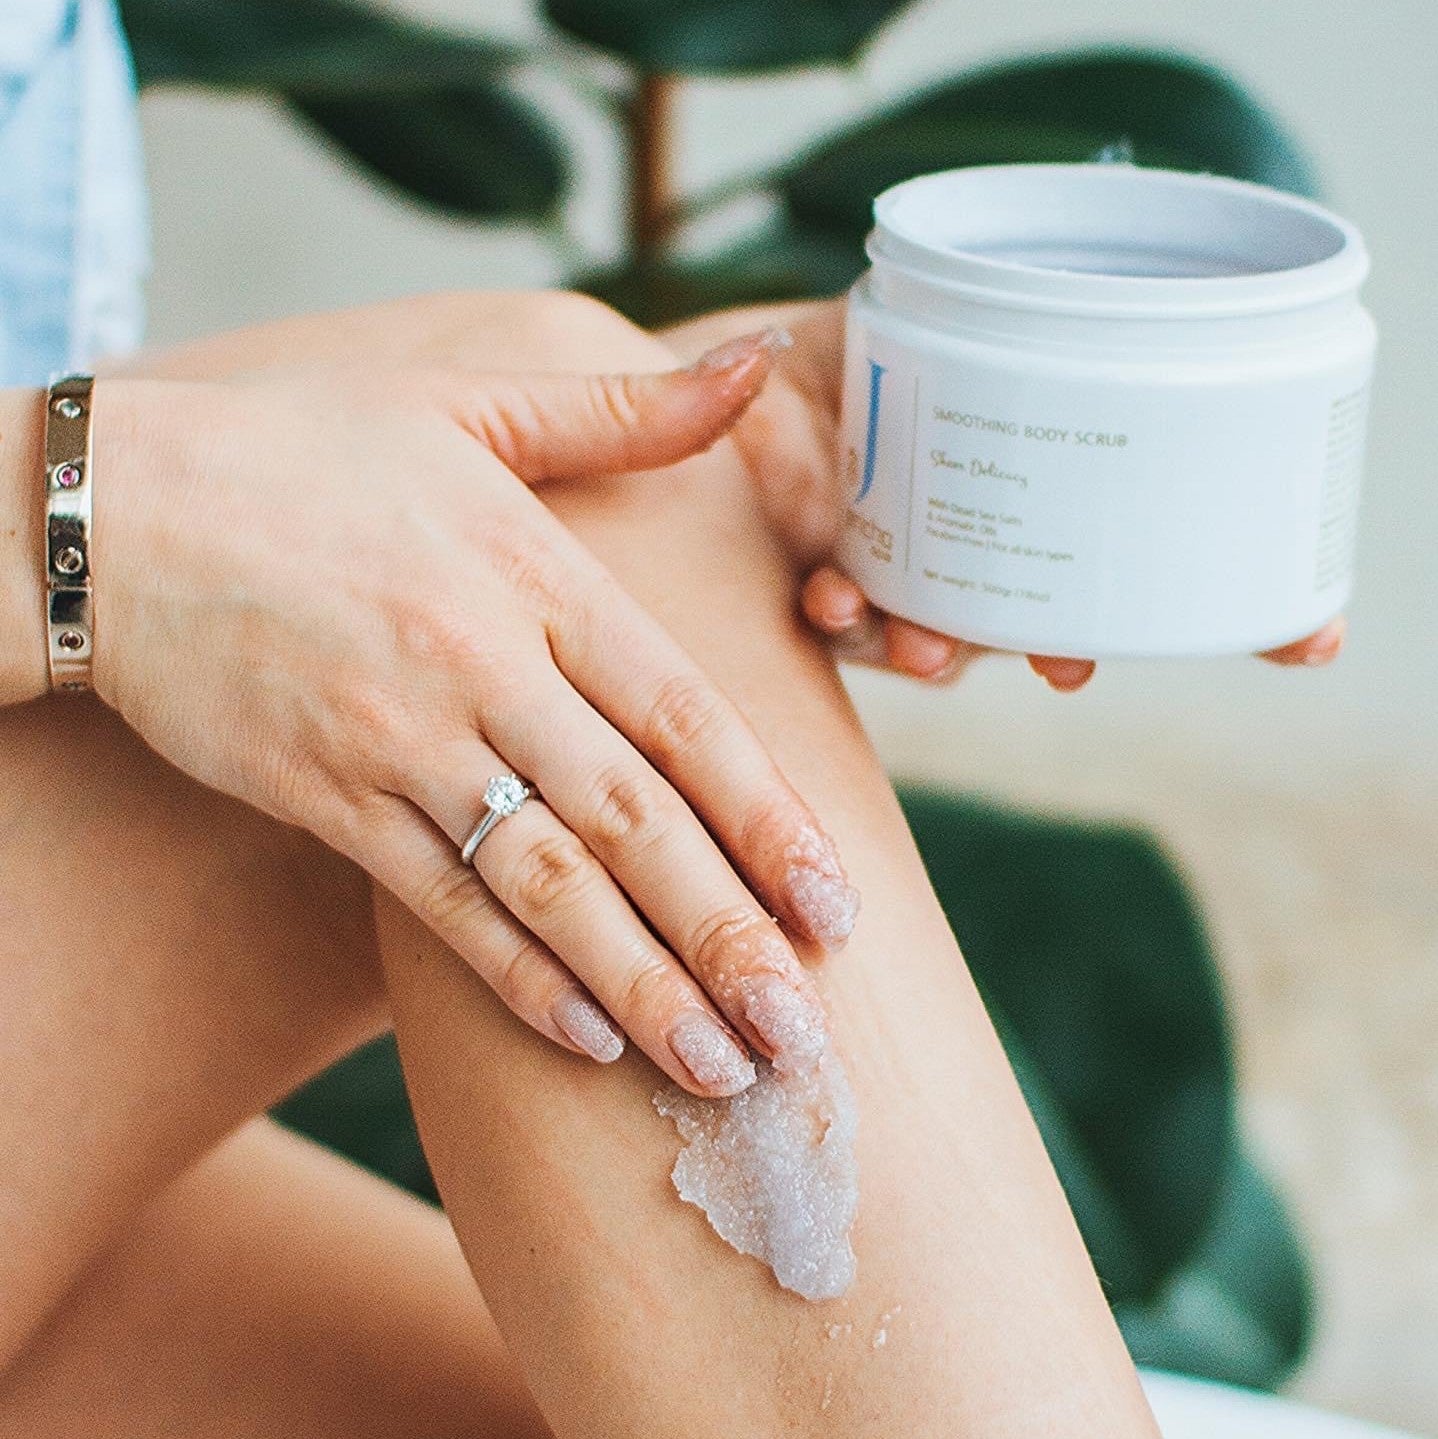 6 Tips on How to Use Body Scrub Effectively